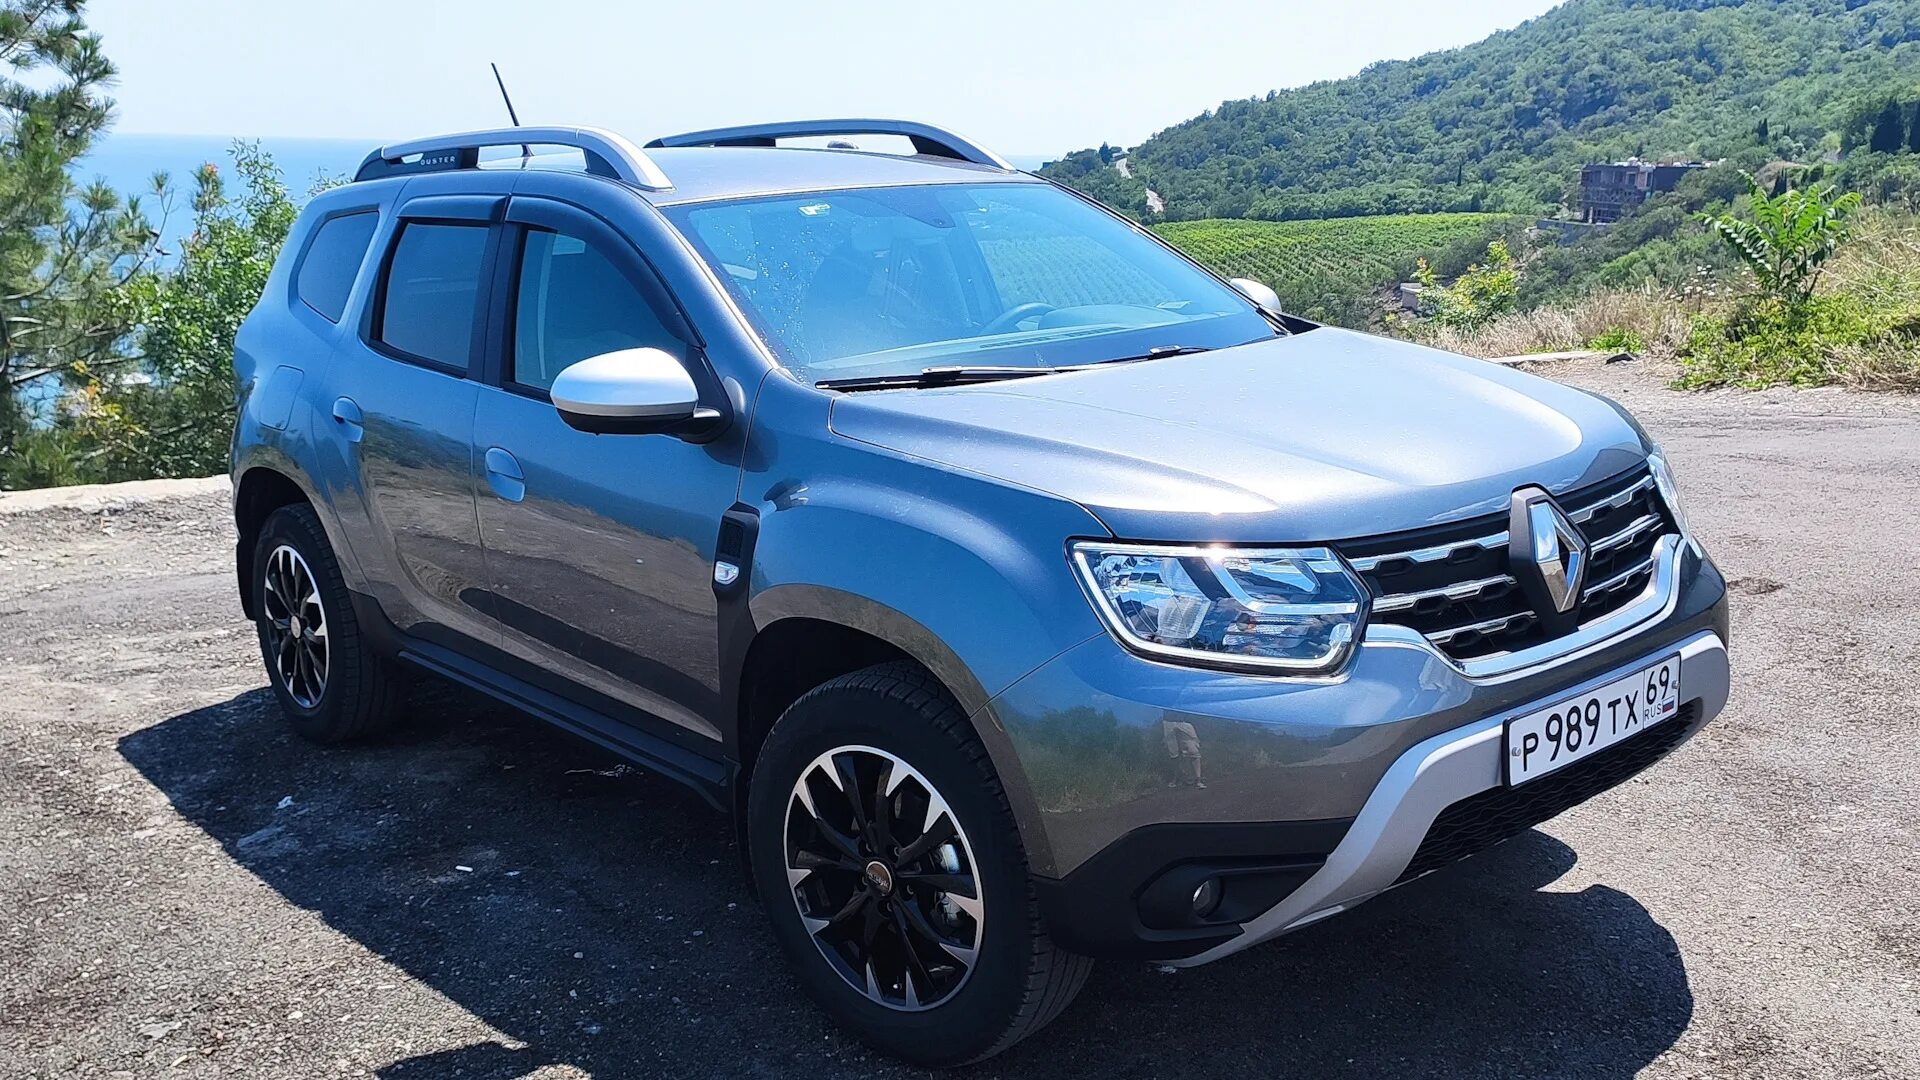 Renault Duster 2. Рено Дастер 2022. Renault Duster 2021. Новый Рено Дастер 2022.